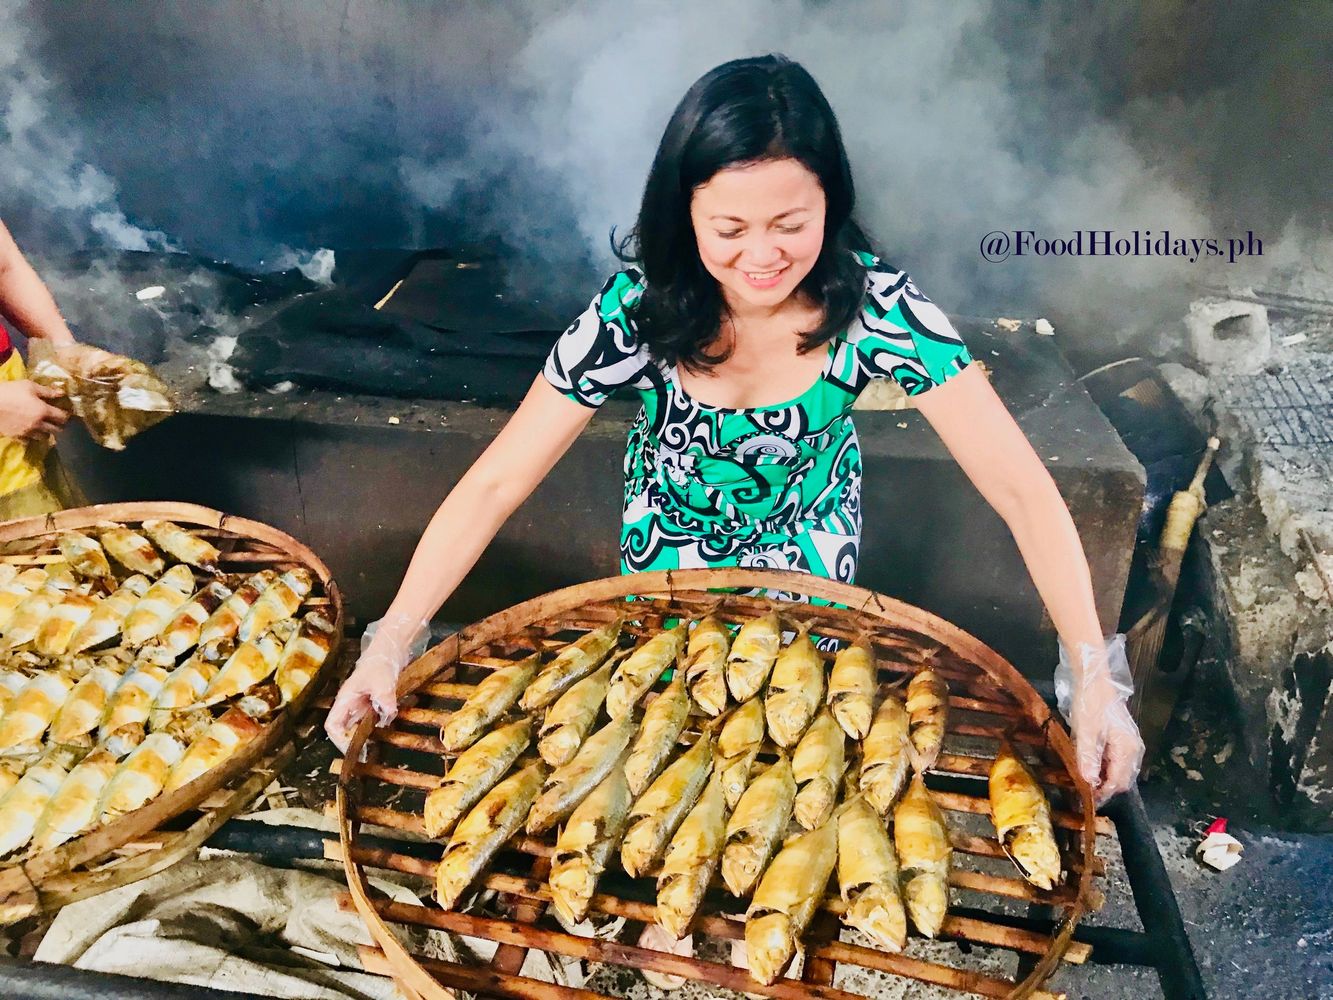 The process of making tinapa (smoked fish) as part of food holidays in the Secret Kitchens of Samar.